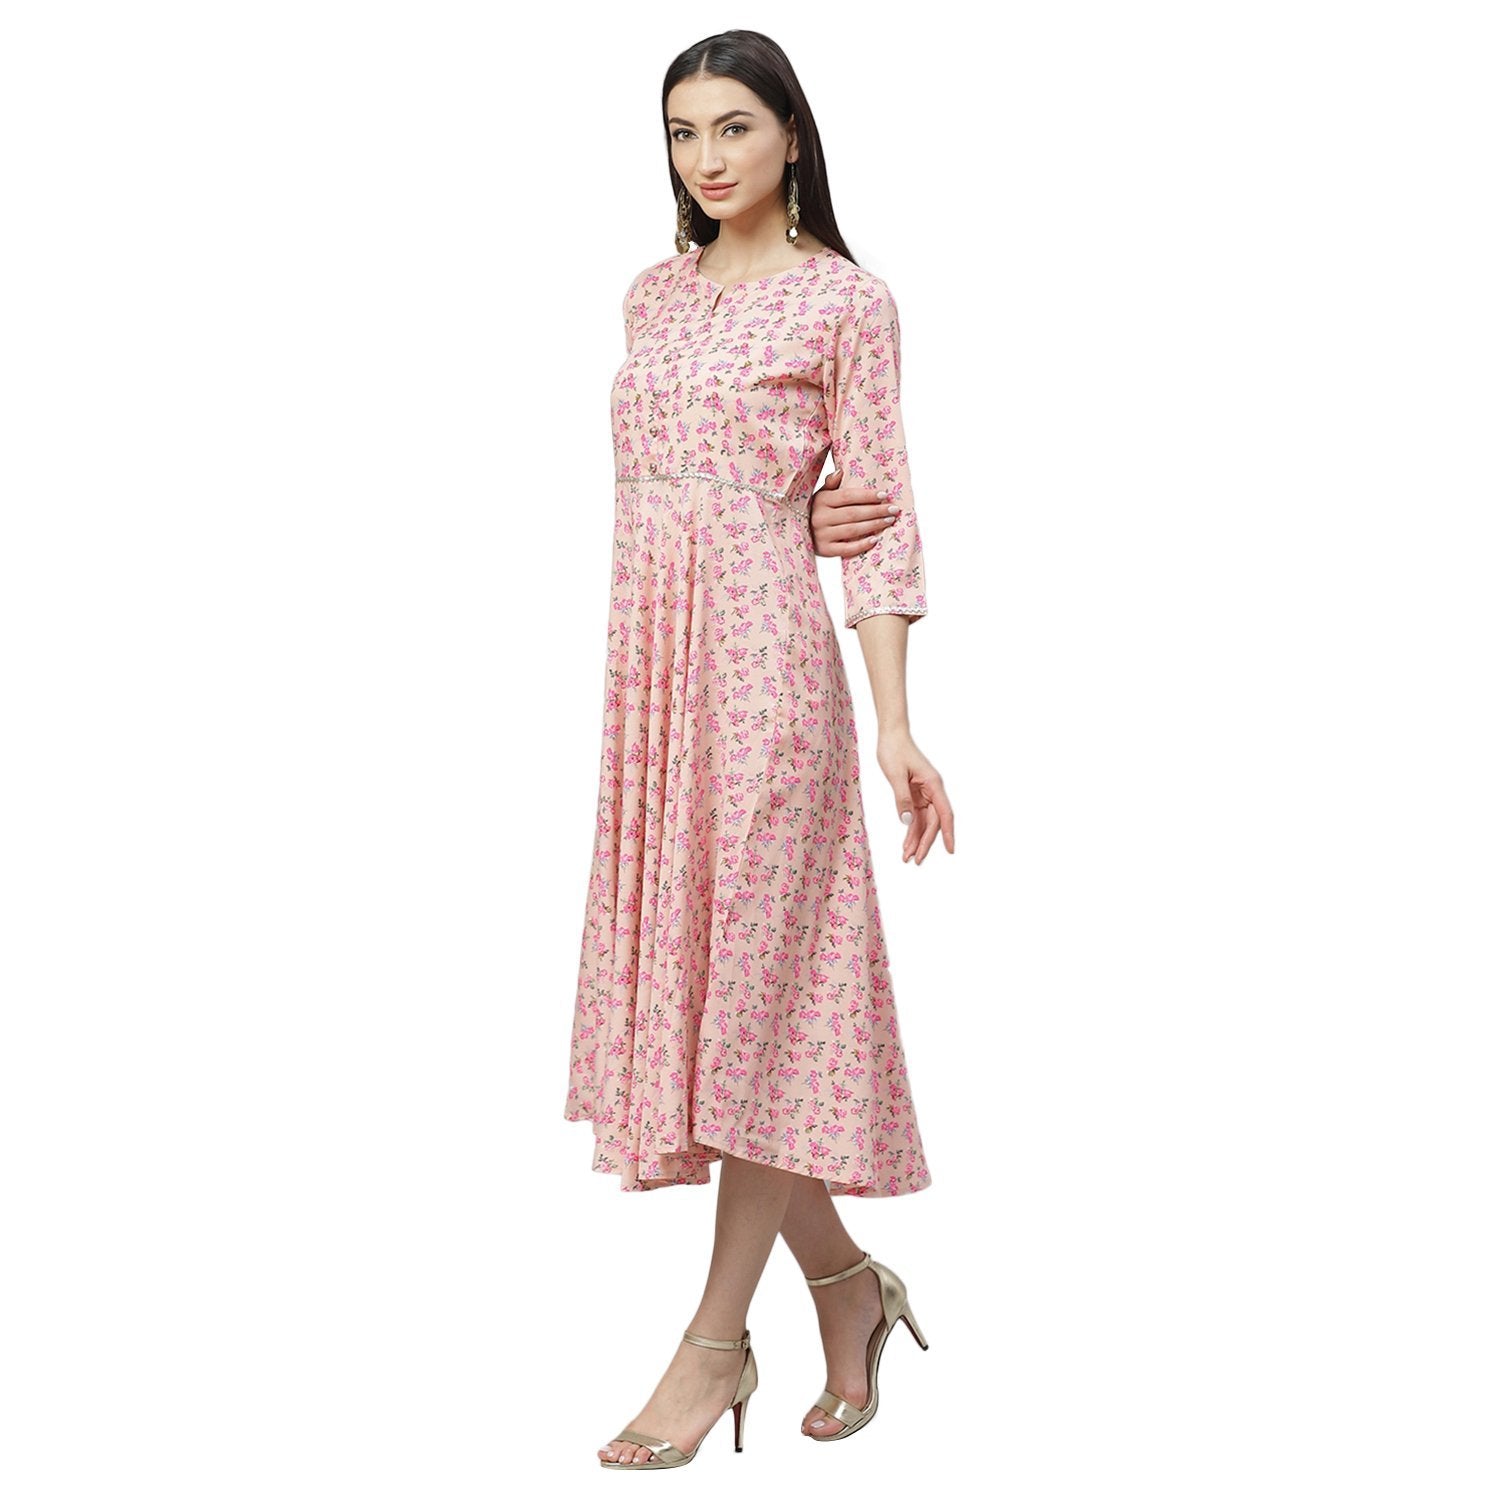 Women's Multicolor Polyster Printed 3/4 Sleeve Round Neck Casual Dress - Myshka